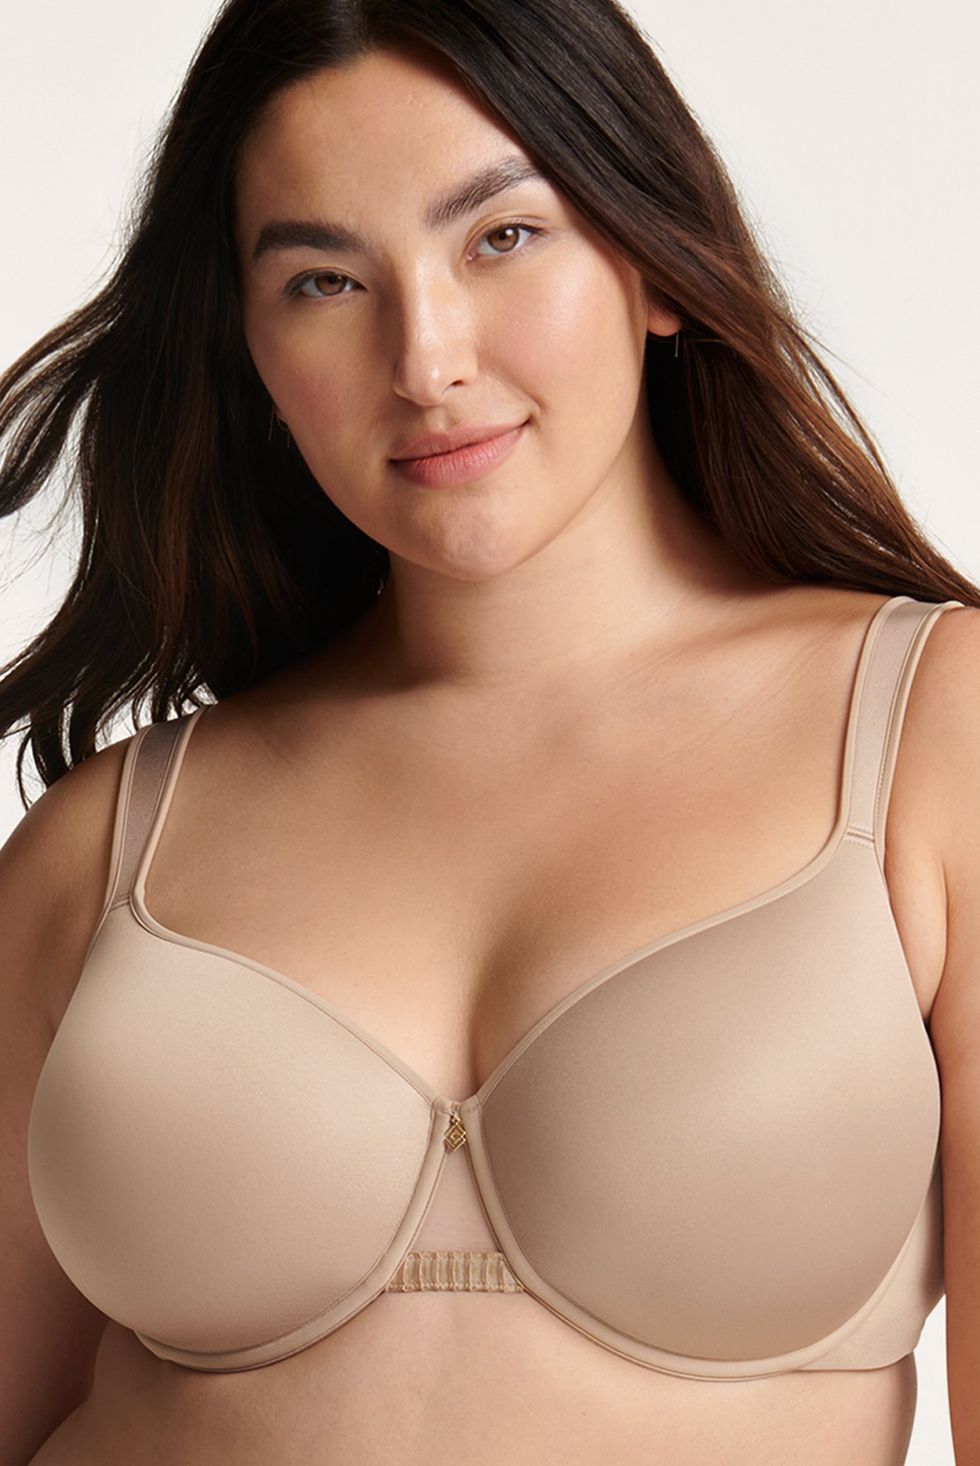 Which online bra company is the best? An honest review of ThirdLove, L